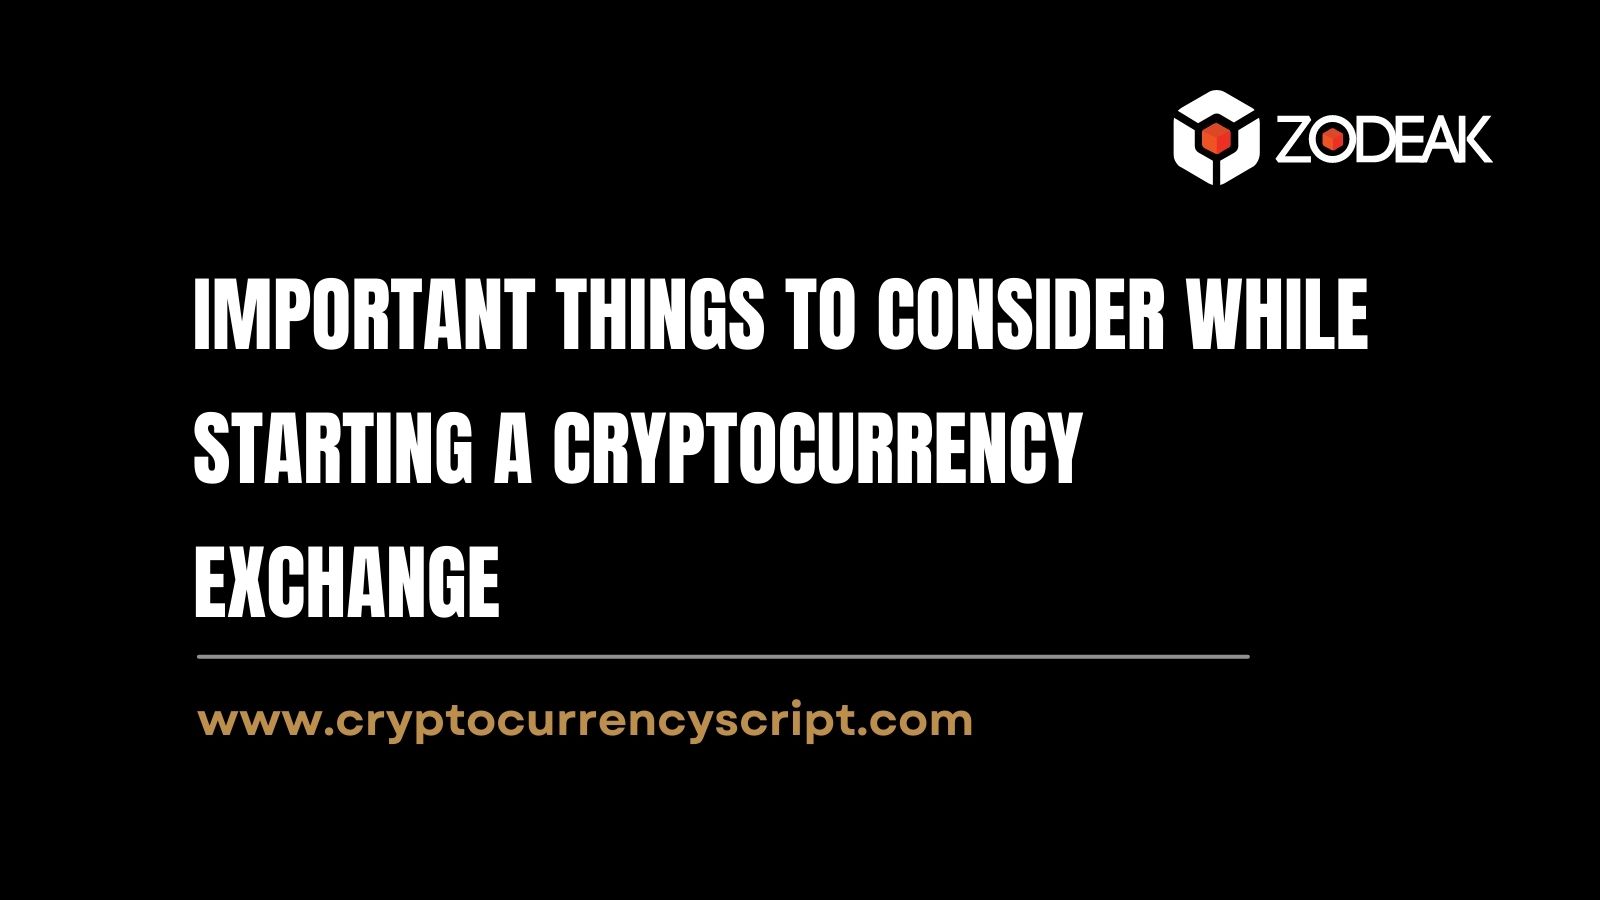 Important things to consider for starting a cryptocurrency exchange